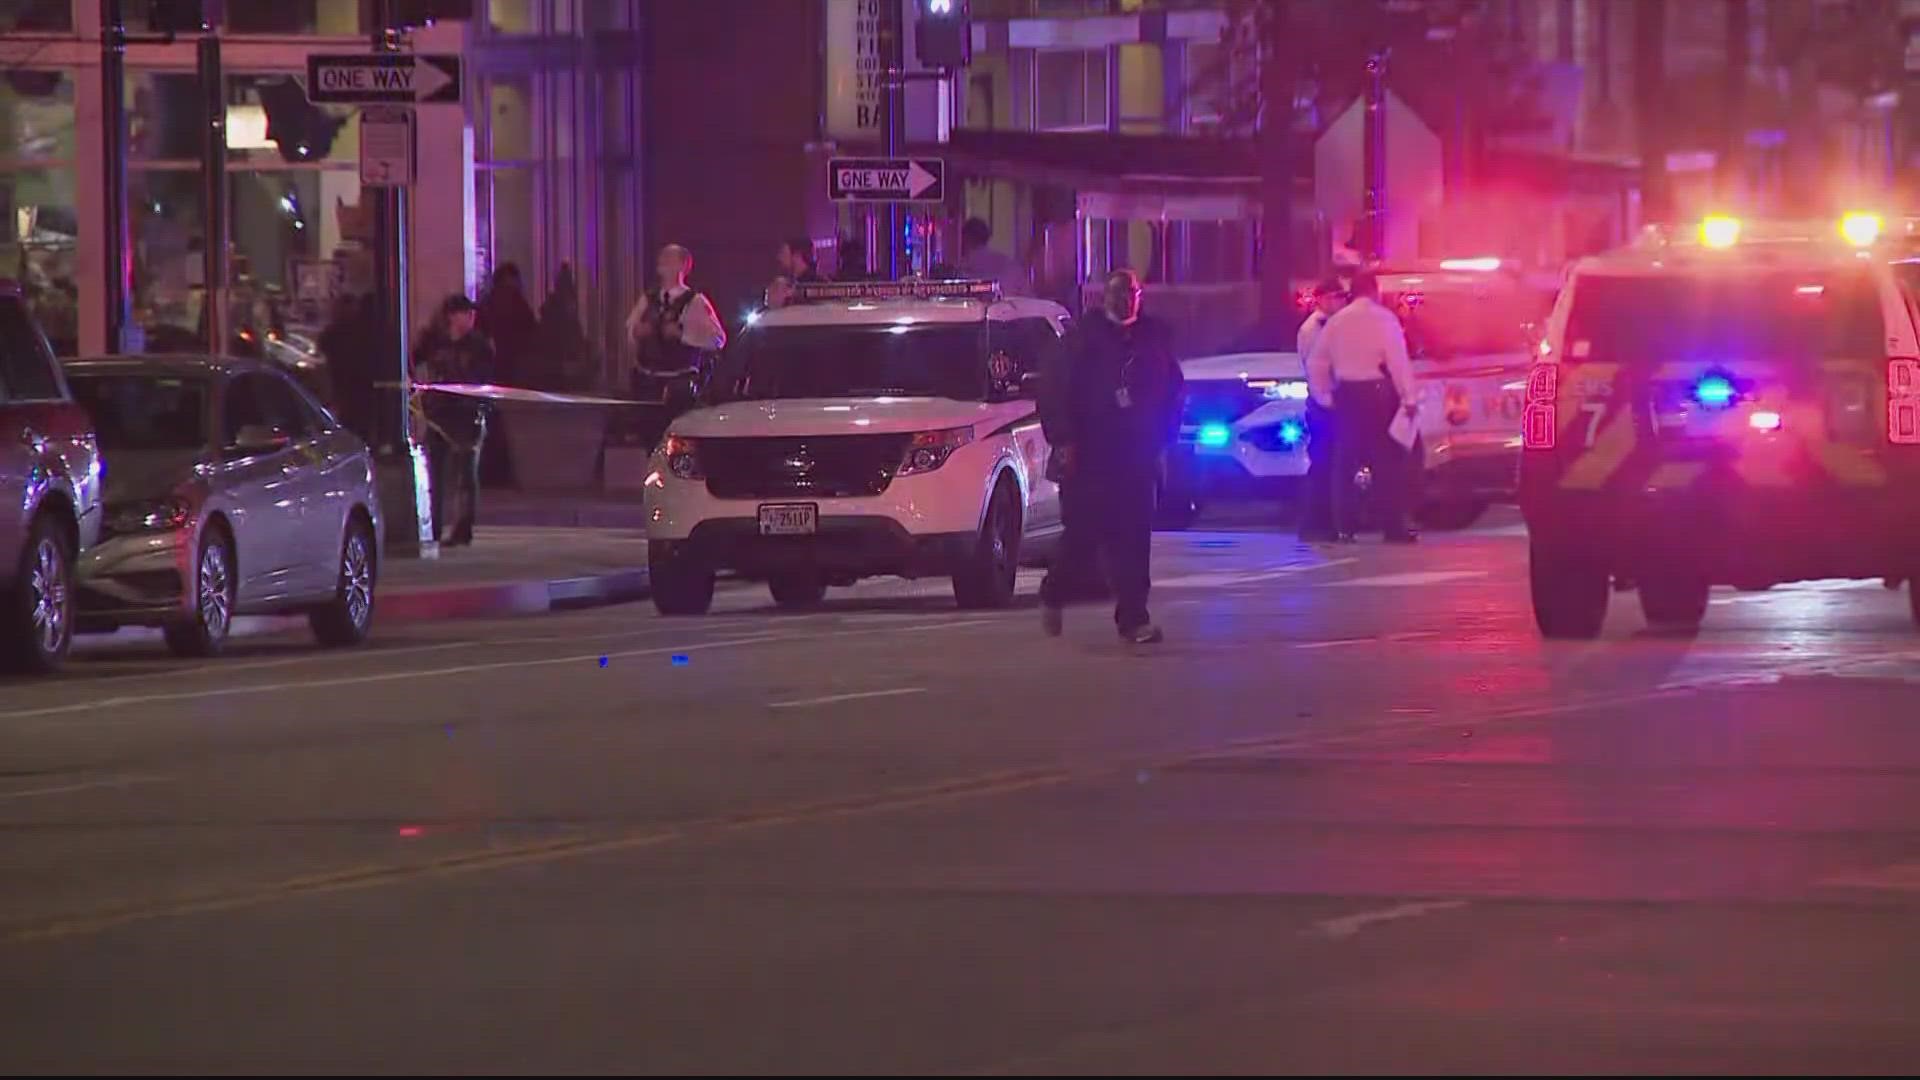 A double shooting in Northwest D.C. on Wednesday night has left a 29-year-old man dead, the Metropolitan Police Department said.